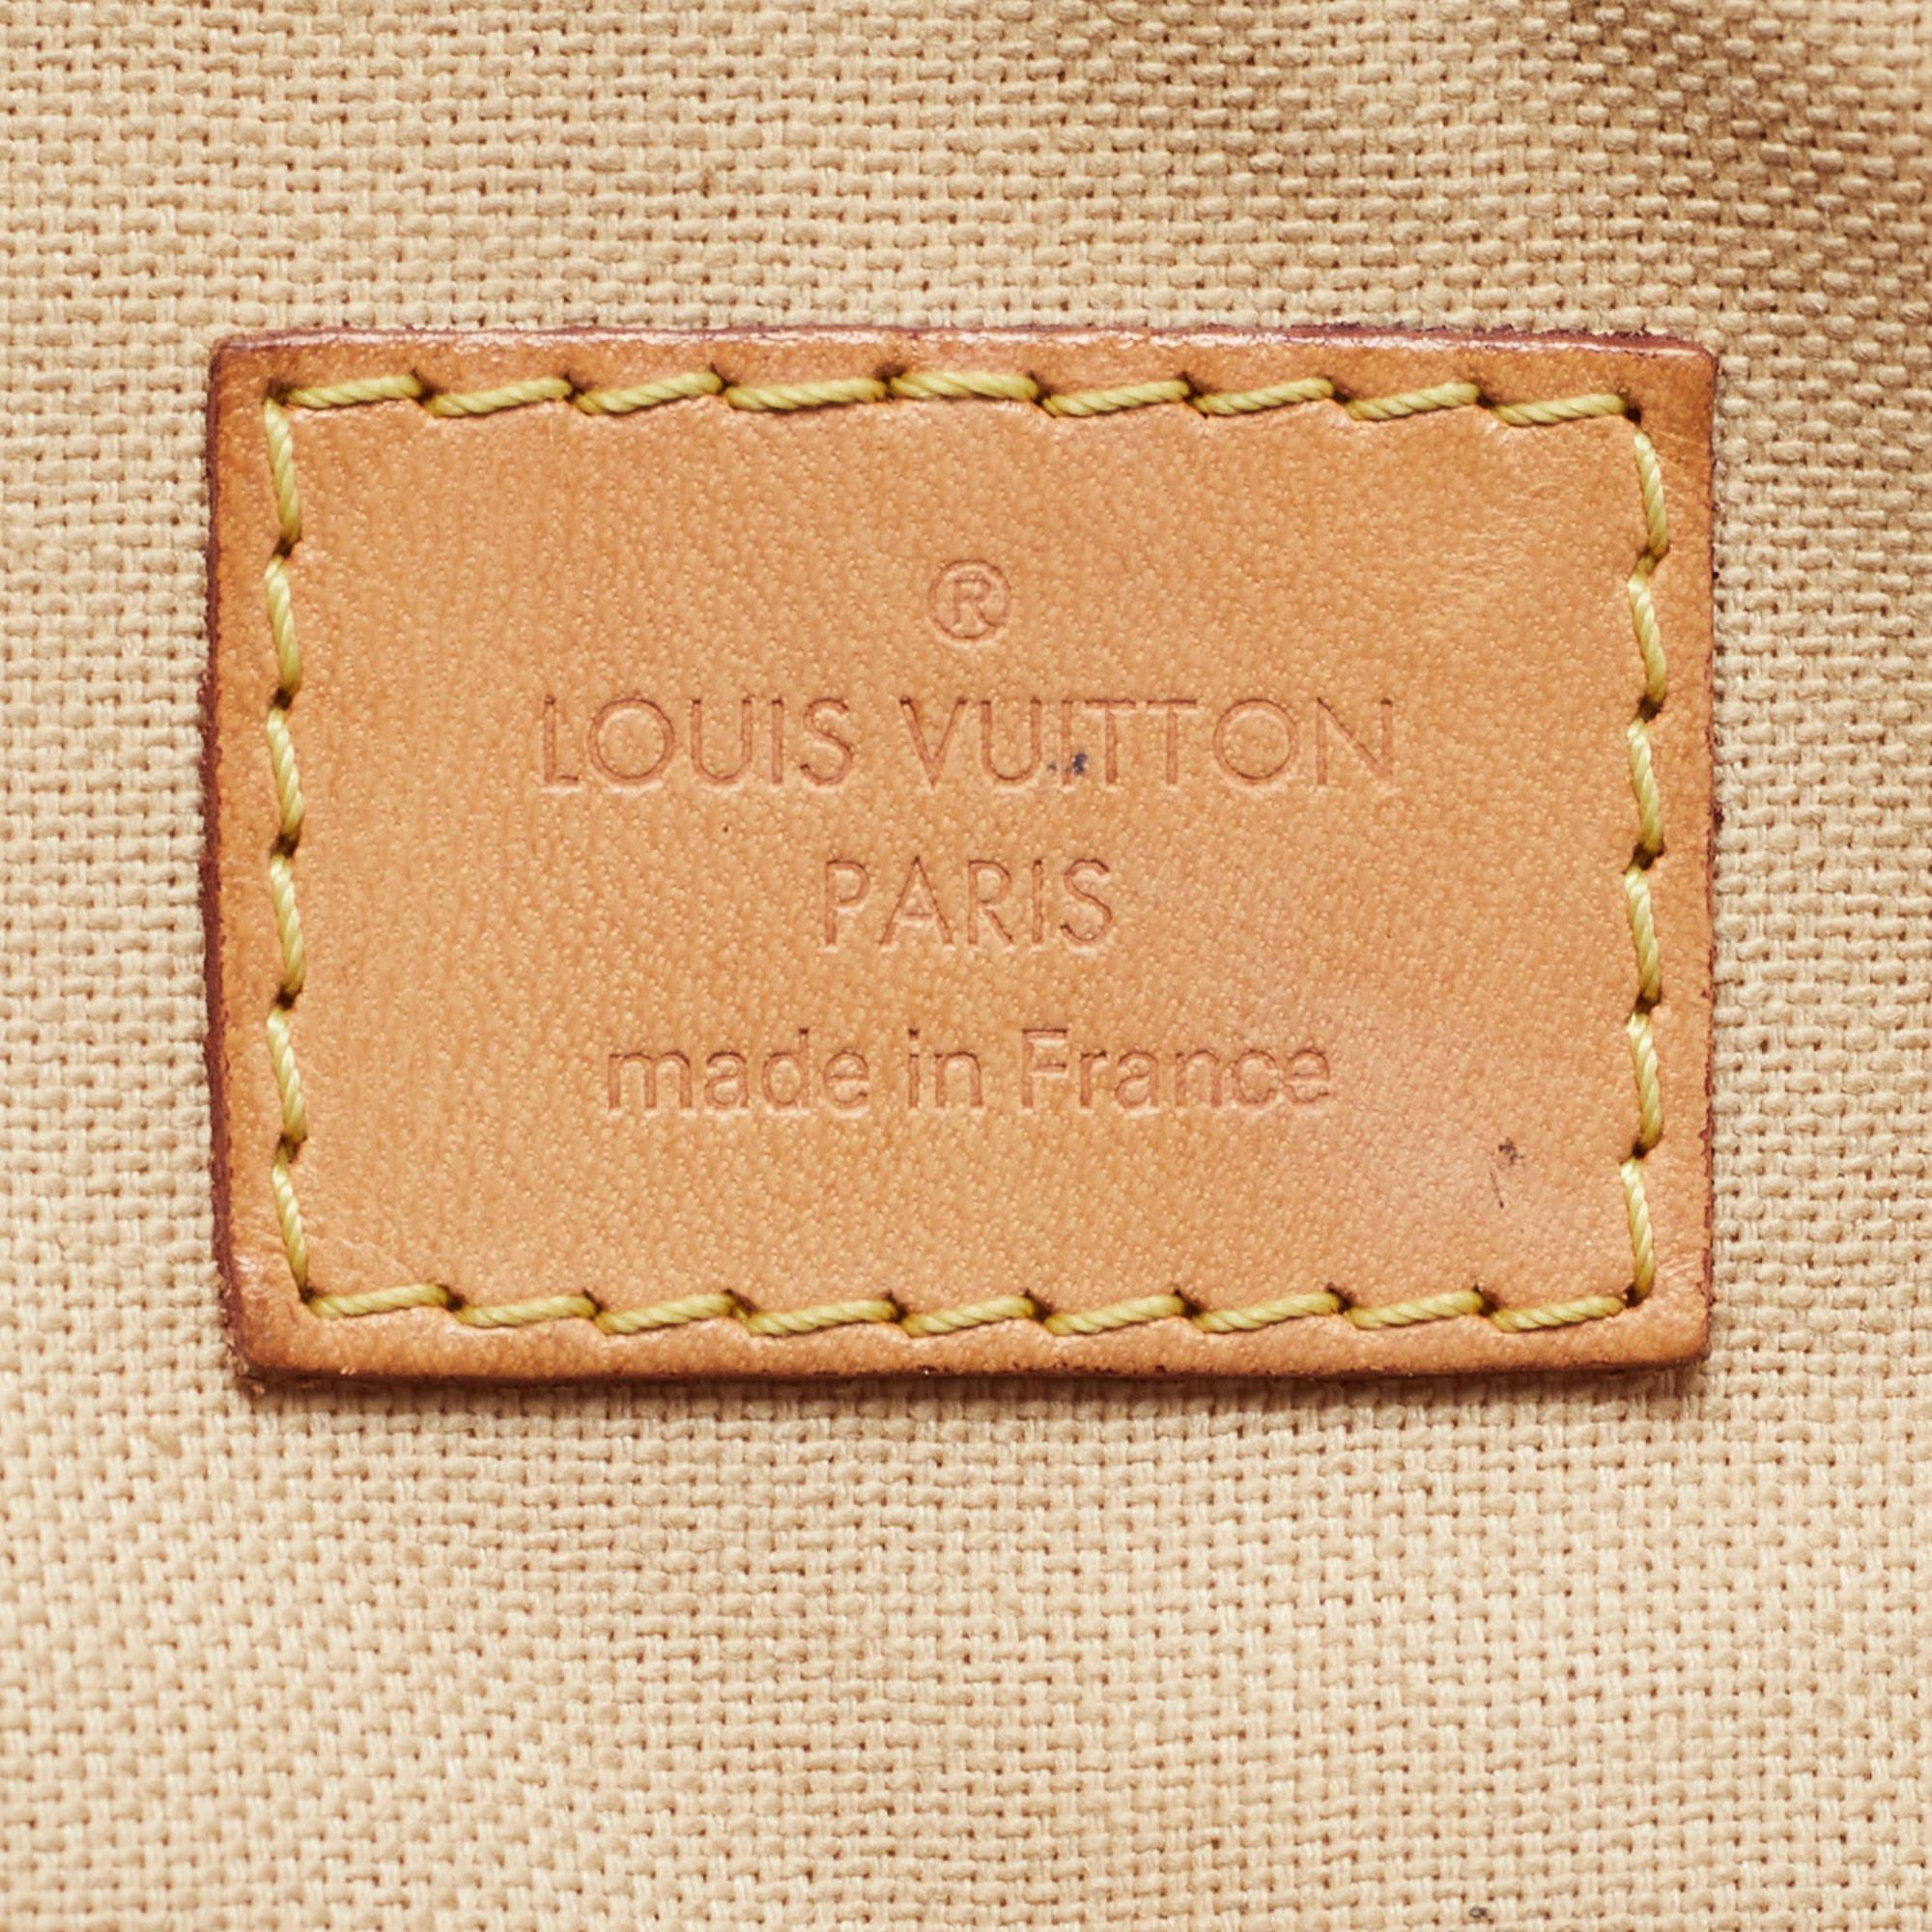 Louis Vuitton Damier Azur Canvas and Leather Siracusa MM Bag For Sale 4